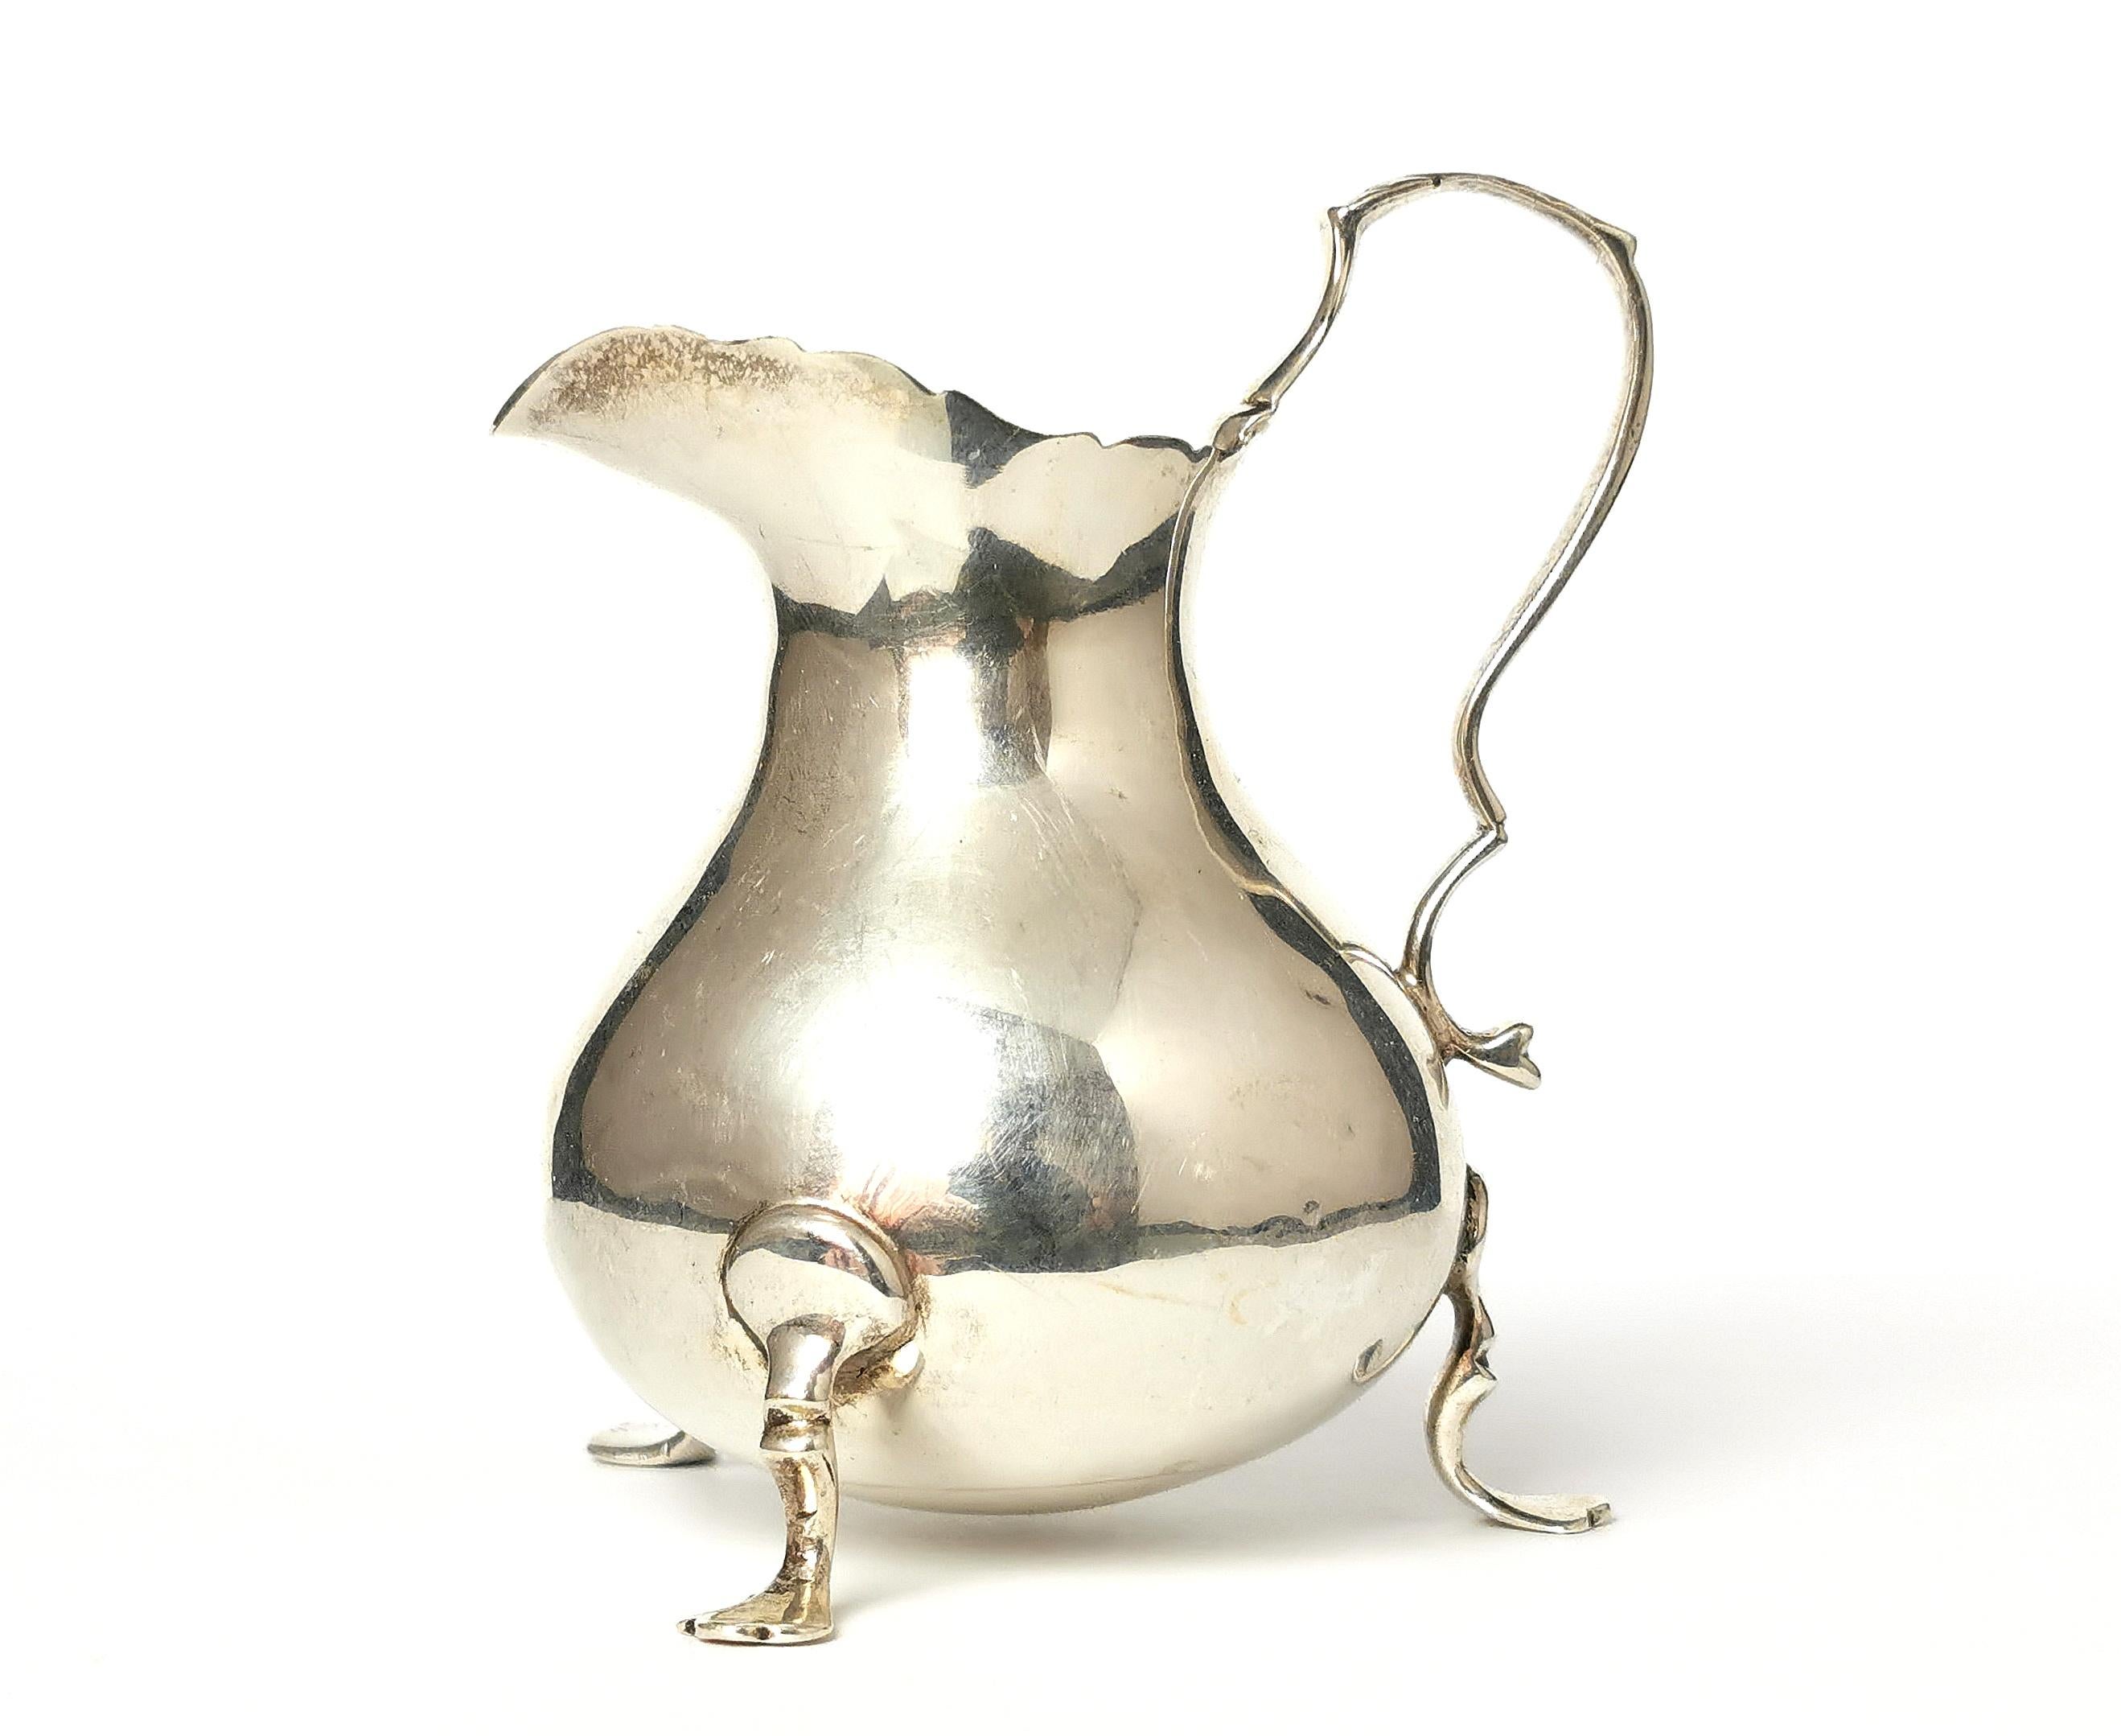 A beautiful antique sterling silver Creamer or milk jug.

This sweet antique Creamer stands on three paw feet and has a squat, pot bellied body which tapers up to the lightly wavy spout.

It has a fine silver handle with a minimalist arrow